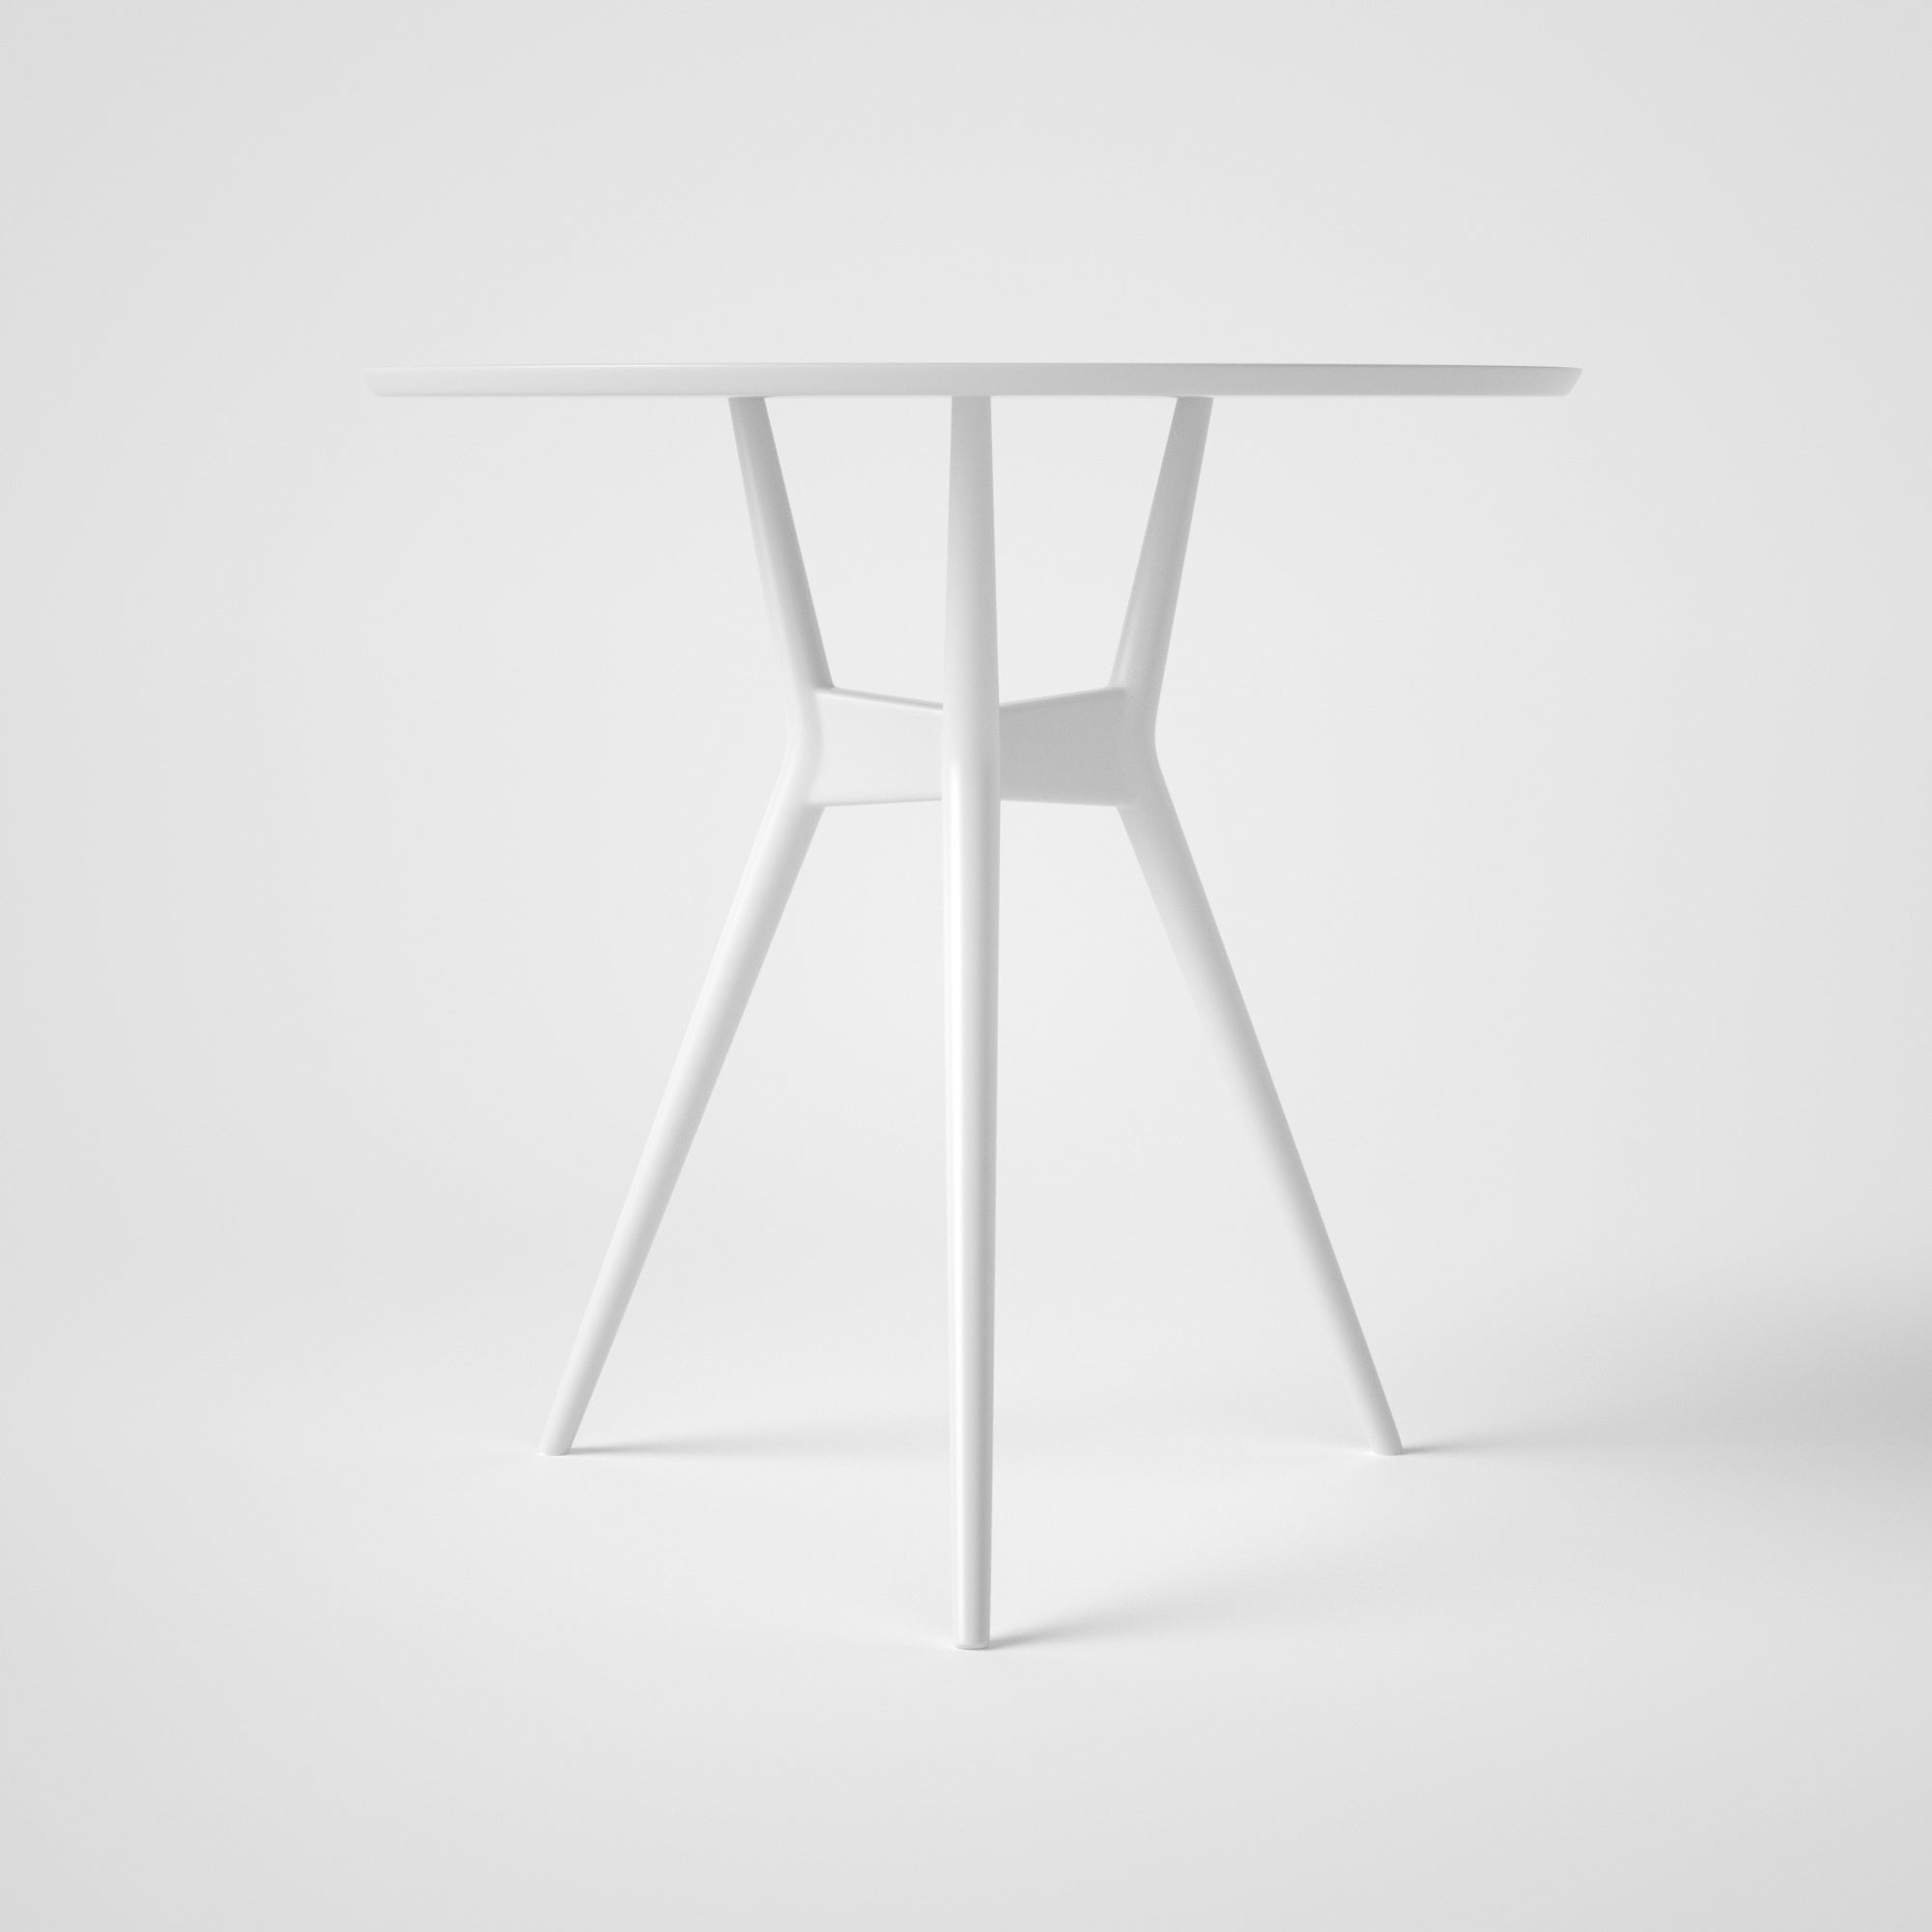 Sinfonia Outdoor dining table